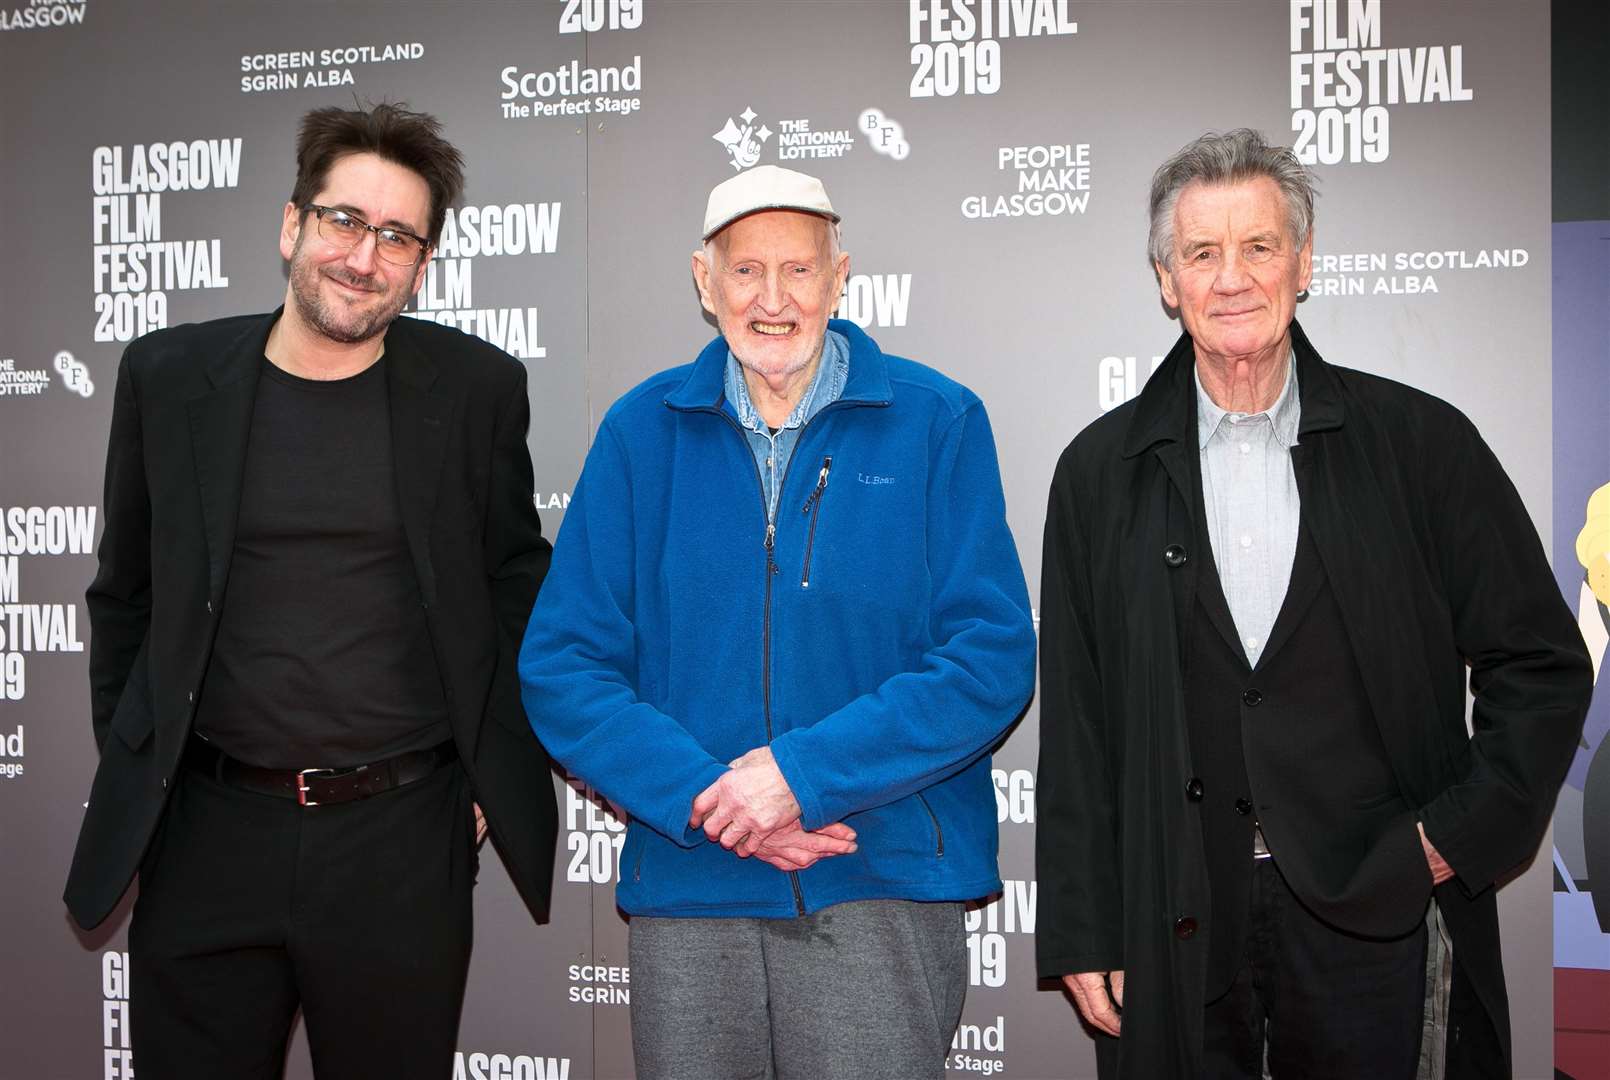 Director Robbie Fraser, Mr MacInnes and Michael Palin at the UK premiere of Final Ascent, based on the Scottish mountaineer’s life, at the 2019 Glasgow Film Festival (Eoin Carey/PA)